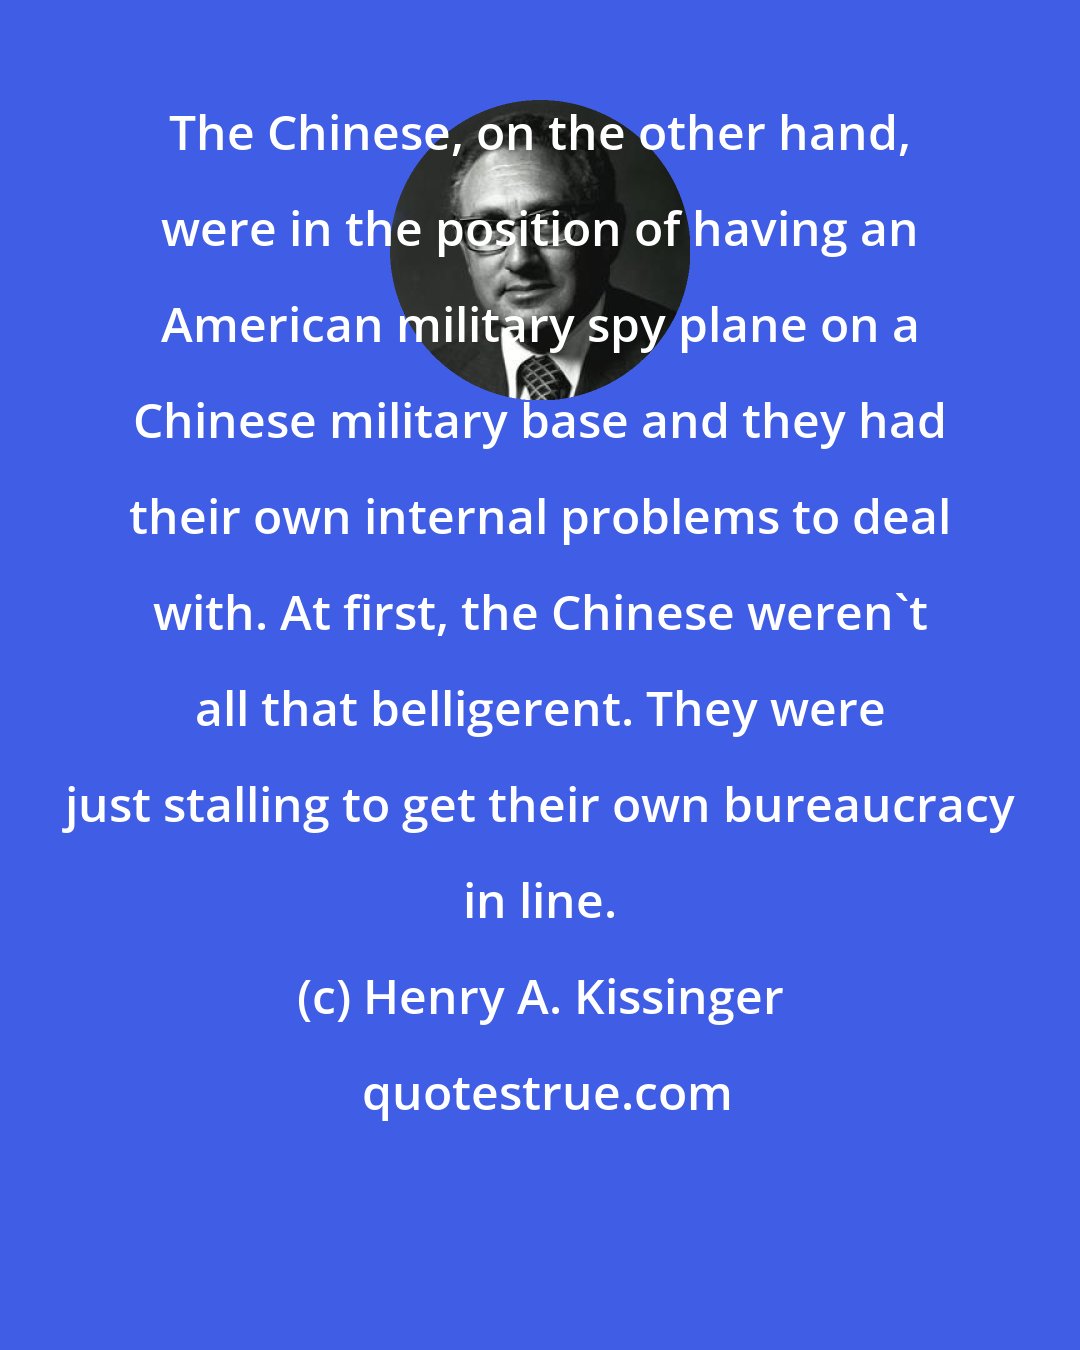 Henry A. Kissinger: The Chinese, on the other hand, were in the position of having an American military spy plane on a Chinese military base and they had their own internal problems to deal with. At first, the Chinese weren't all that belligerent. They were just stalling to get their own bureaucracy in line.